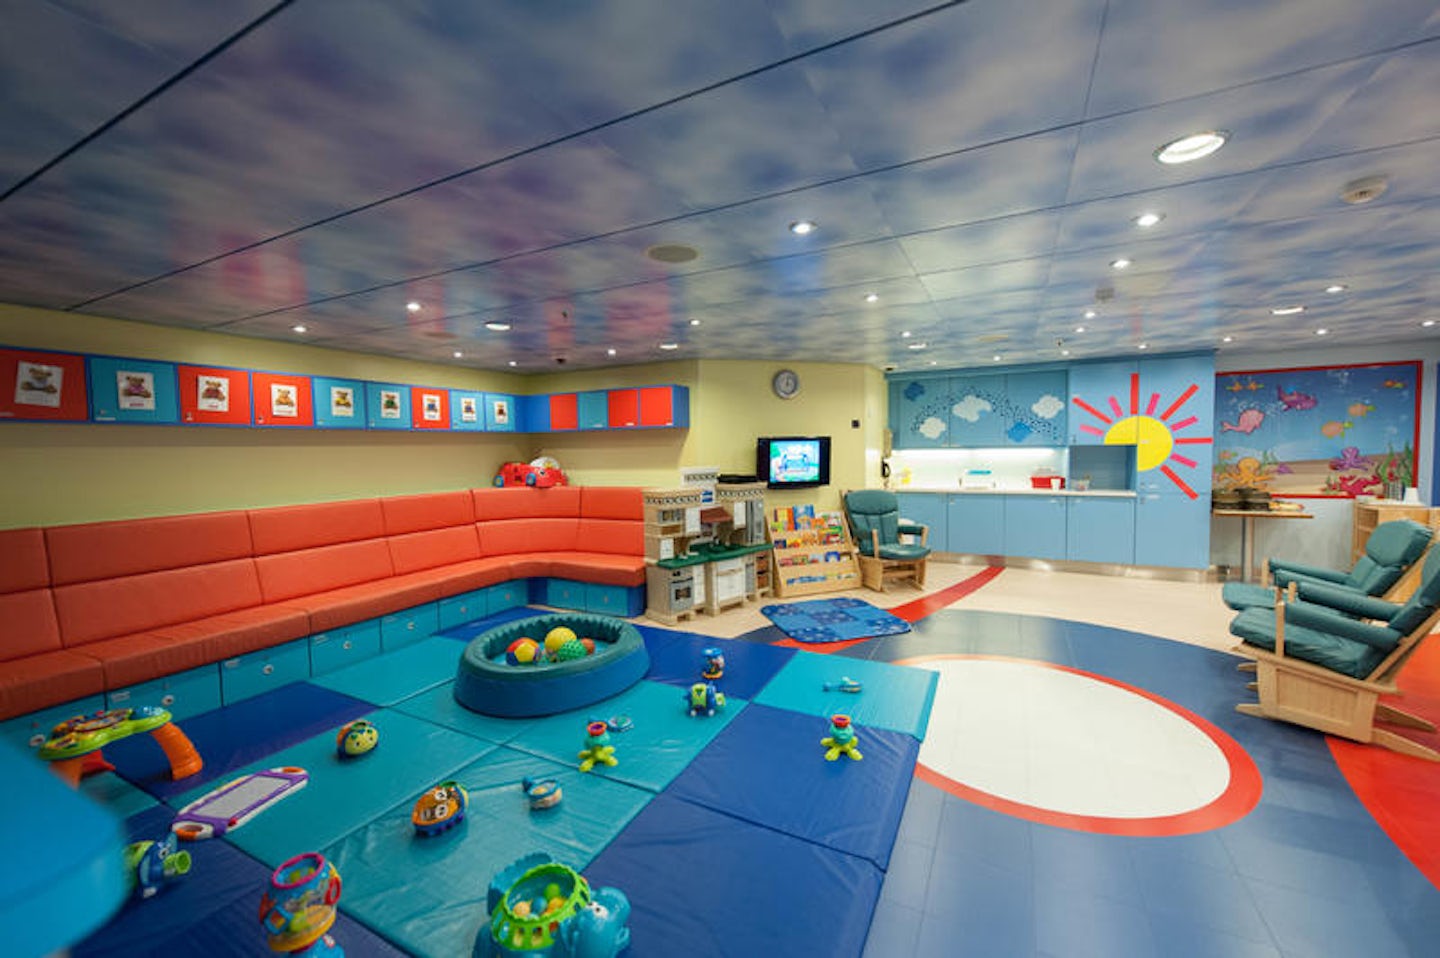 Royal Babies and Tots Nursery on Allure of the Seas